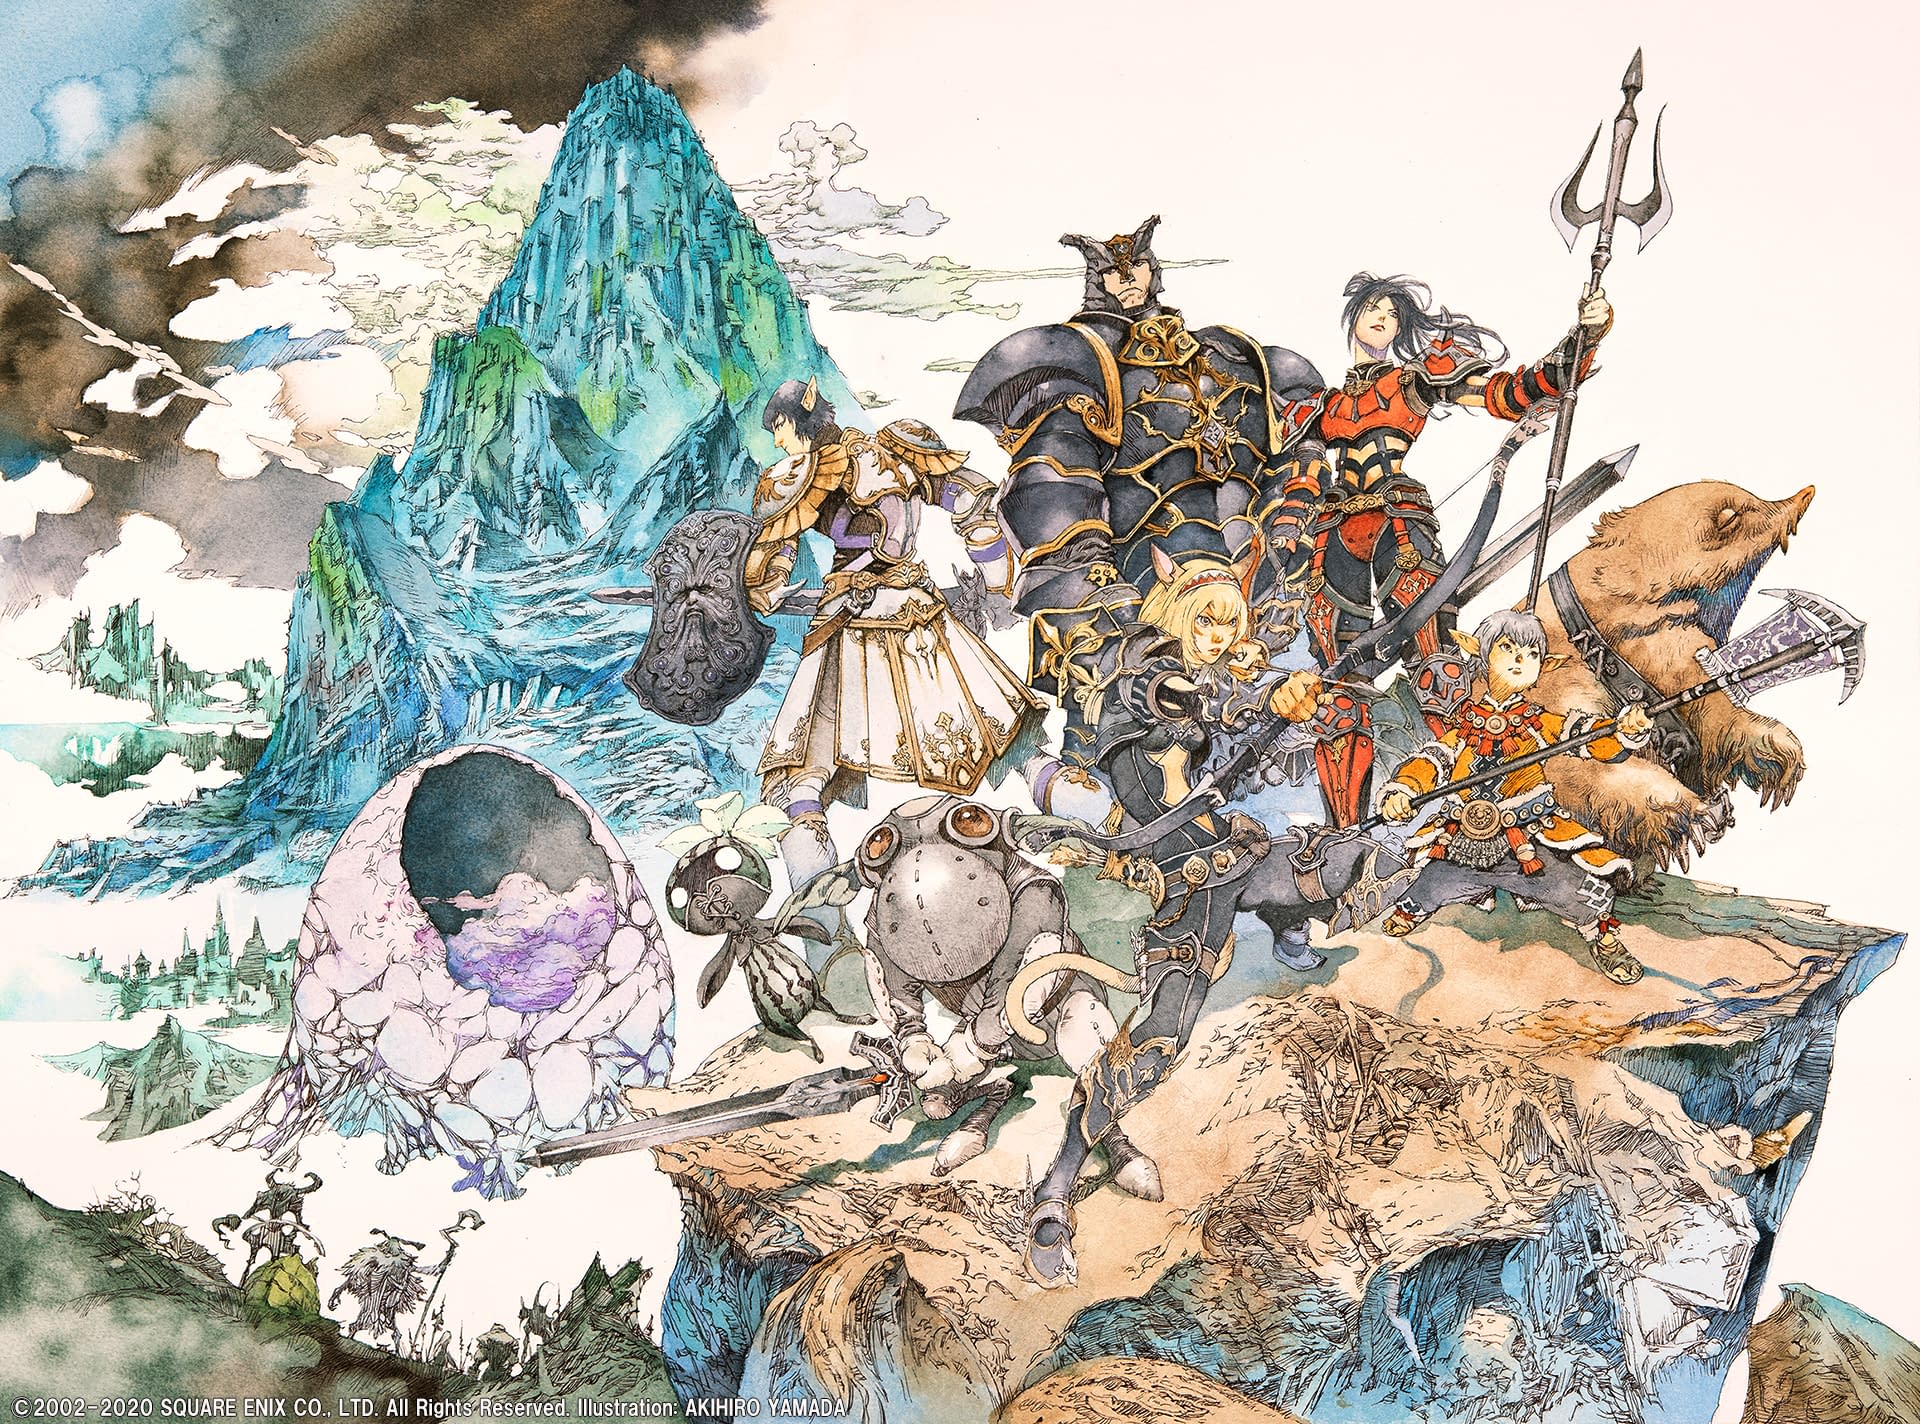 Final Fantasy Xi Saw A Surprising Story Update Begin This Summer With The Voracious Resurgence, The First New Story Content In Five Years.